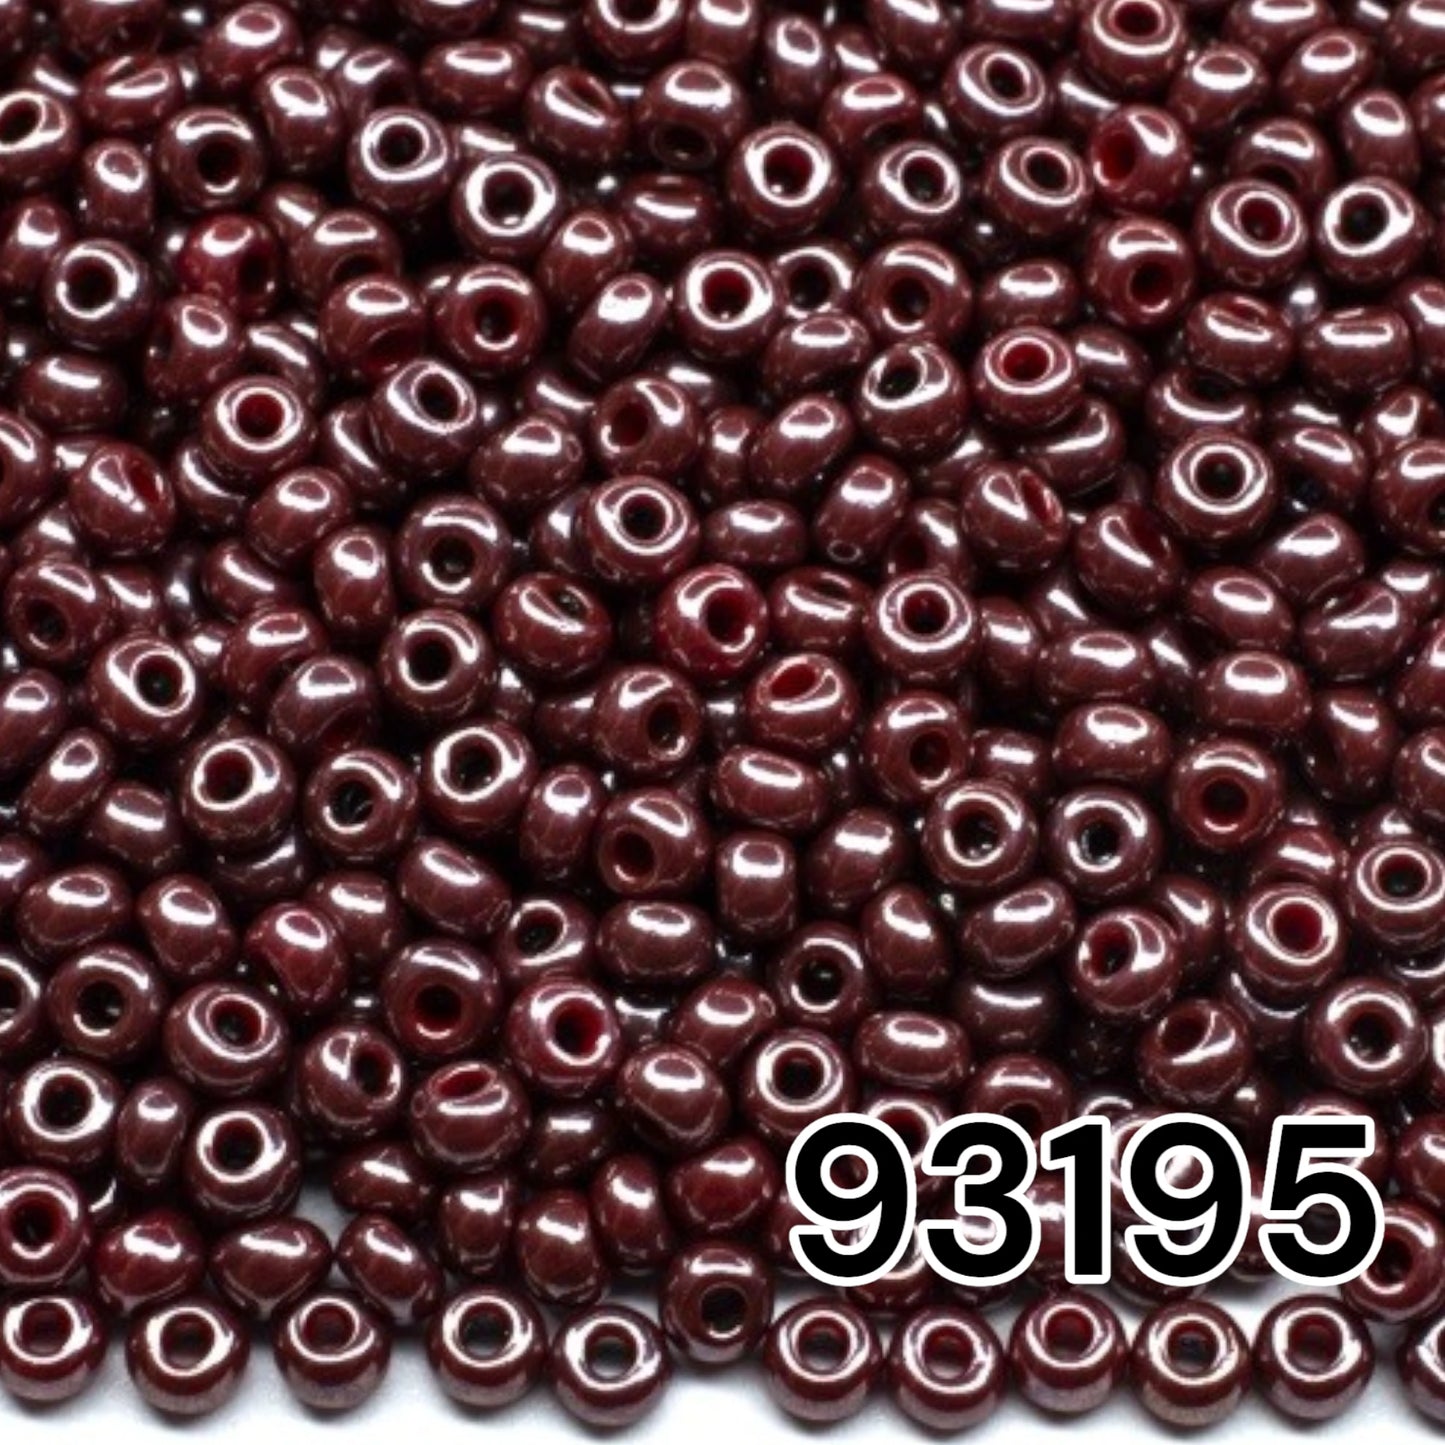 93195 Czech Seed Beads Preciosa Rocailles Opaque - Color Lustered